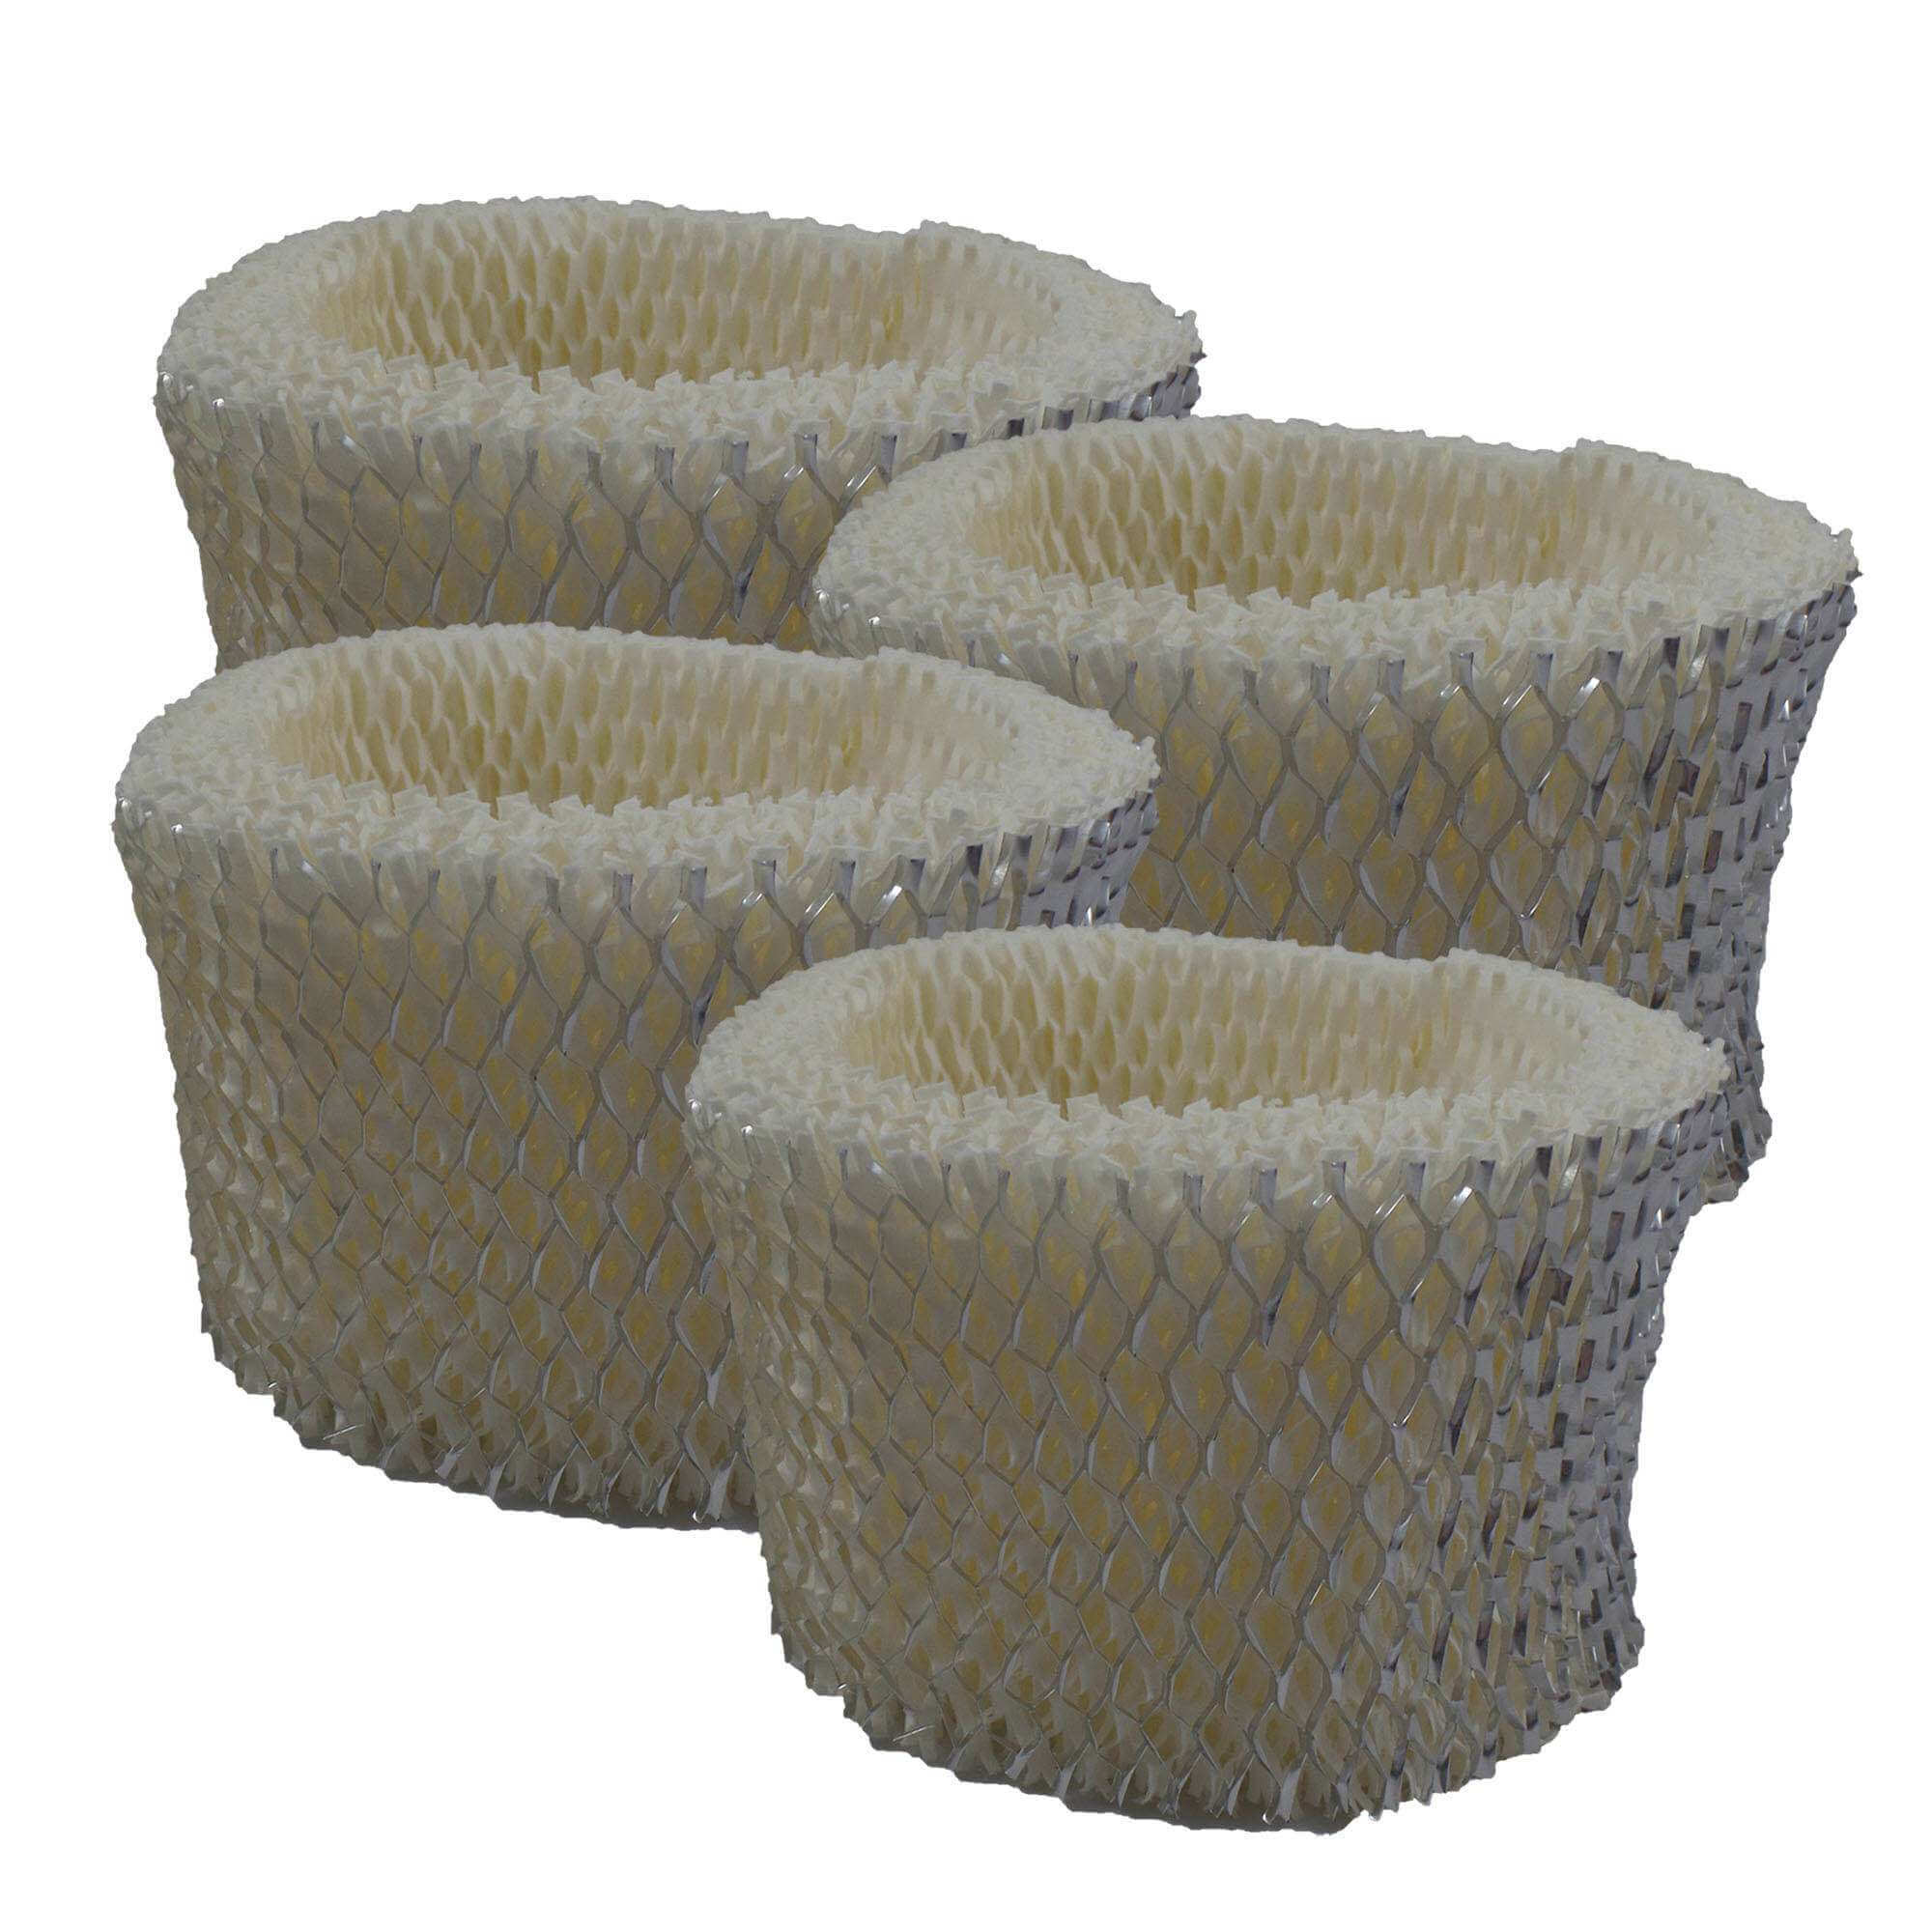 COMPATIBLE With HONEYWELL HCM-890C HUMIDIFIER WICK FILTER REPLACEMENTS 3 PACK 